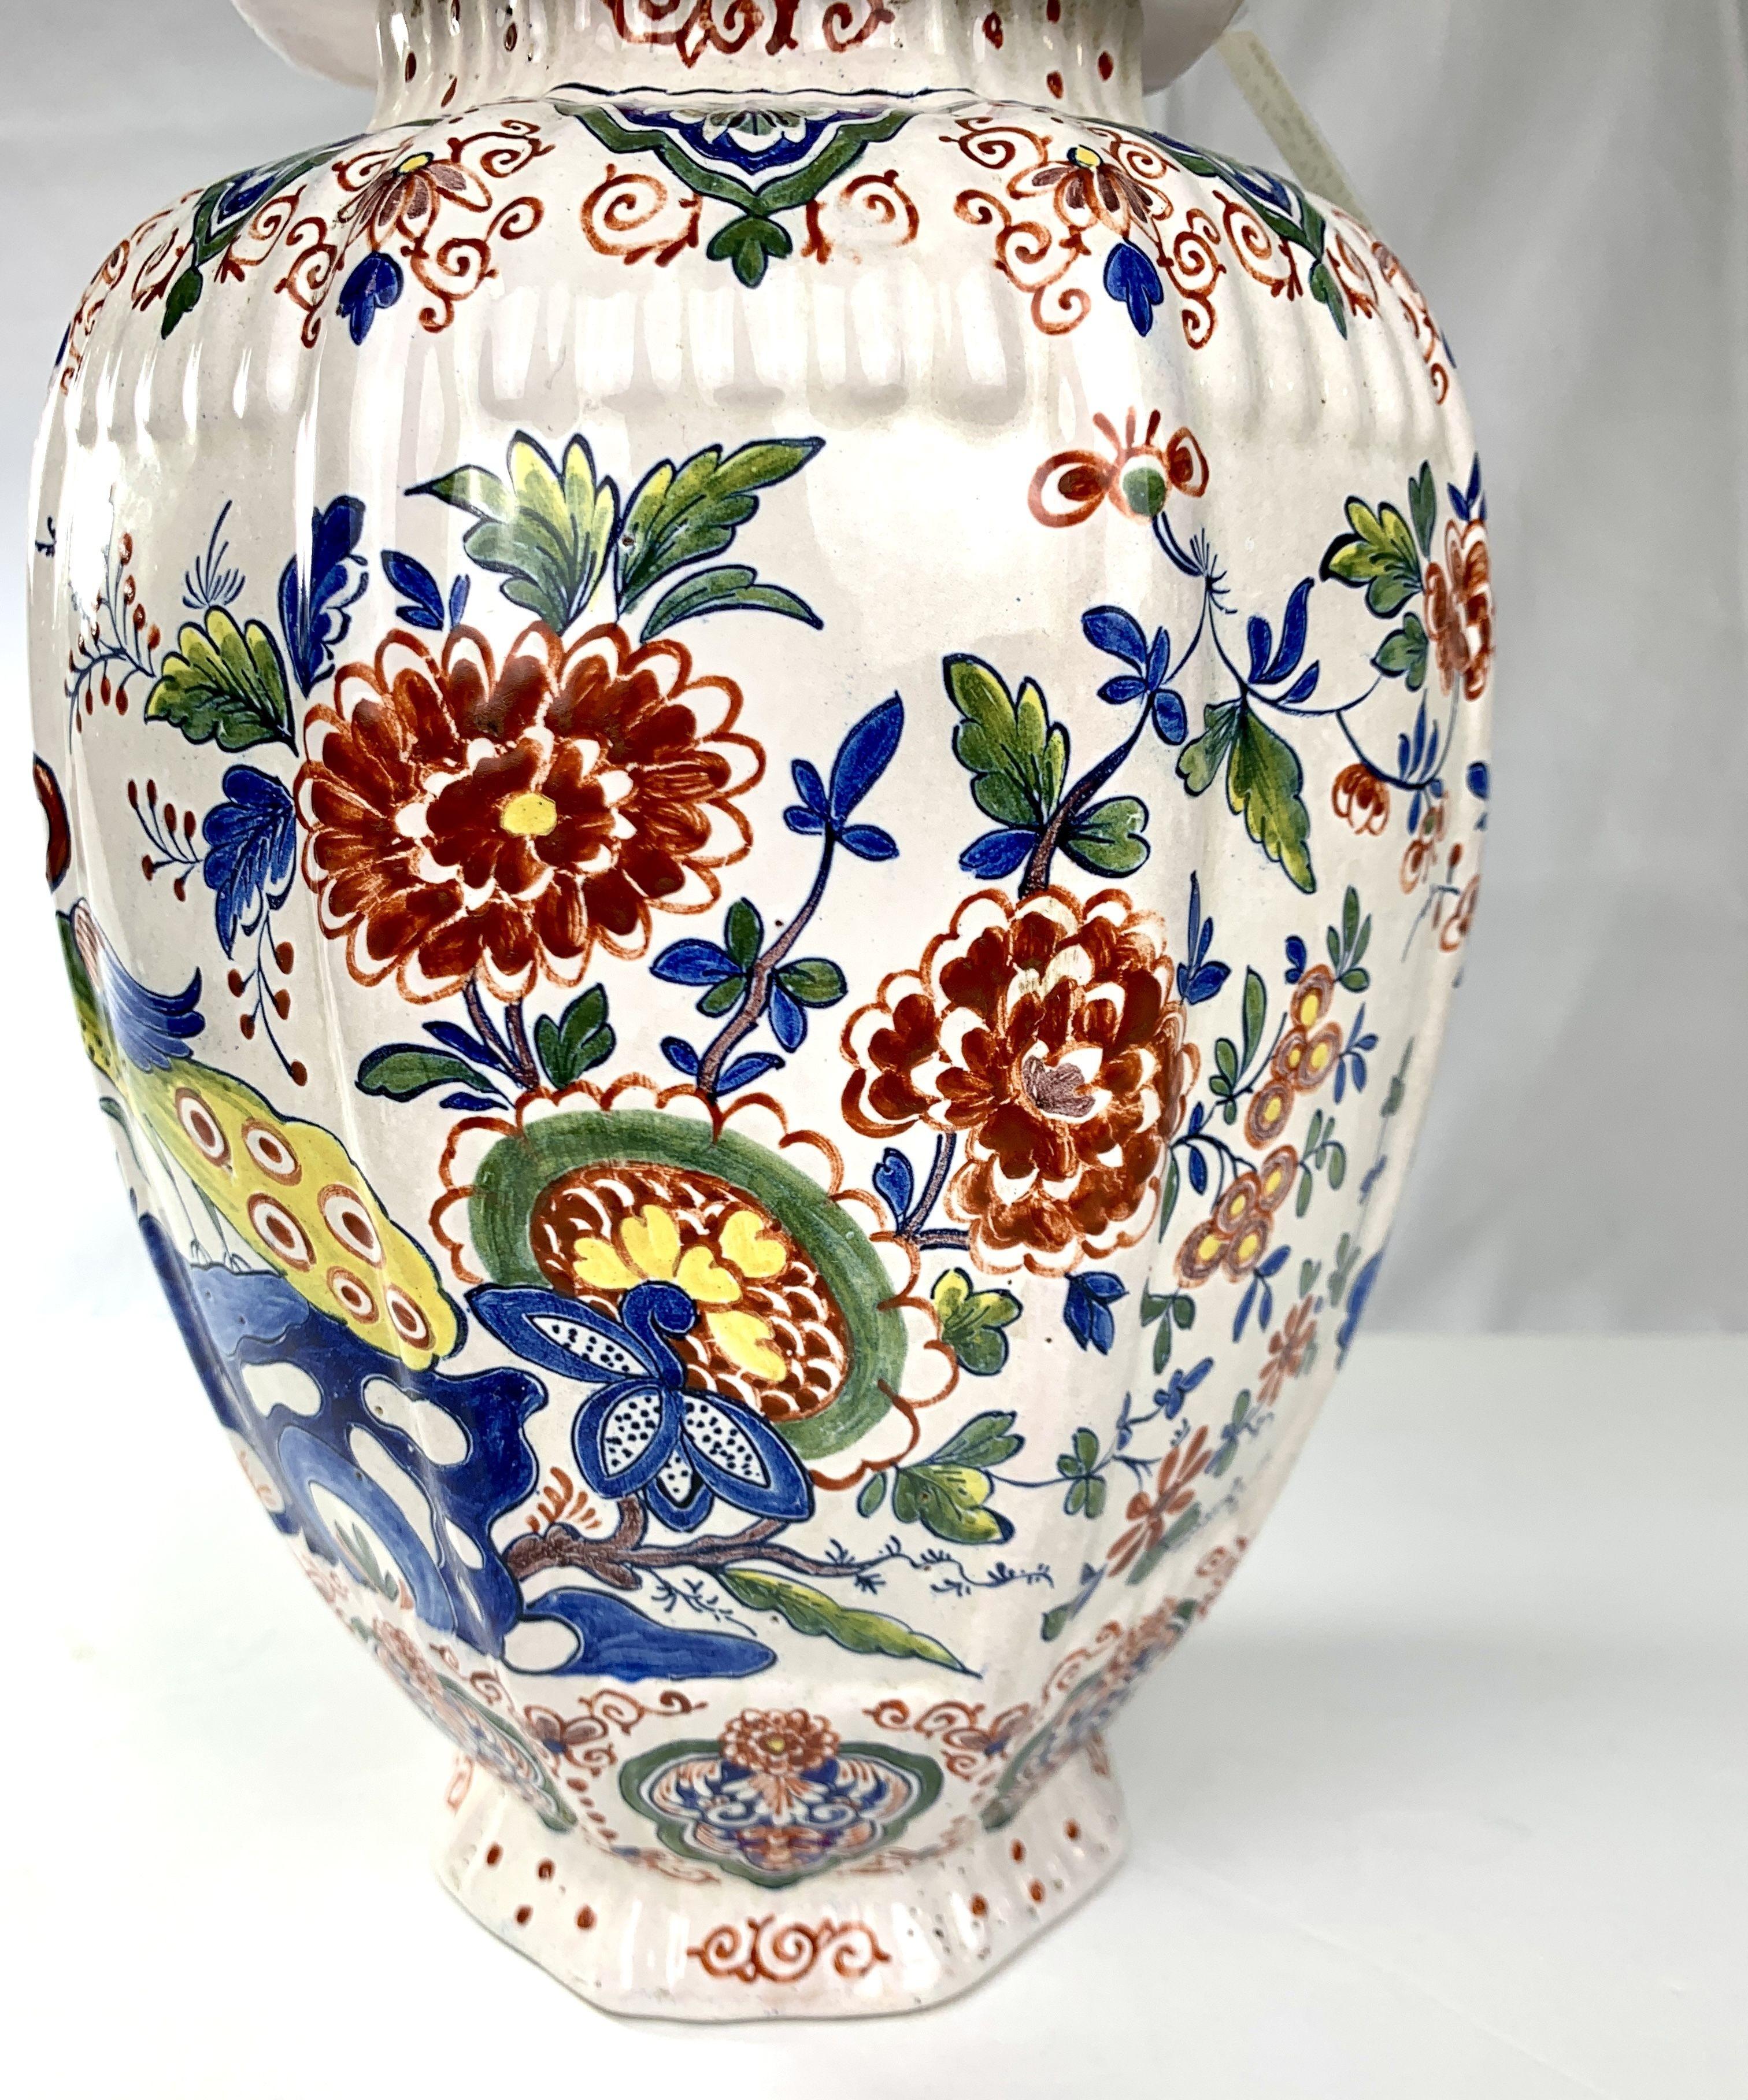 Dutch Delft Jar Hand-Painted in Traditional Polychrome Colors 1